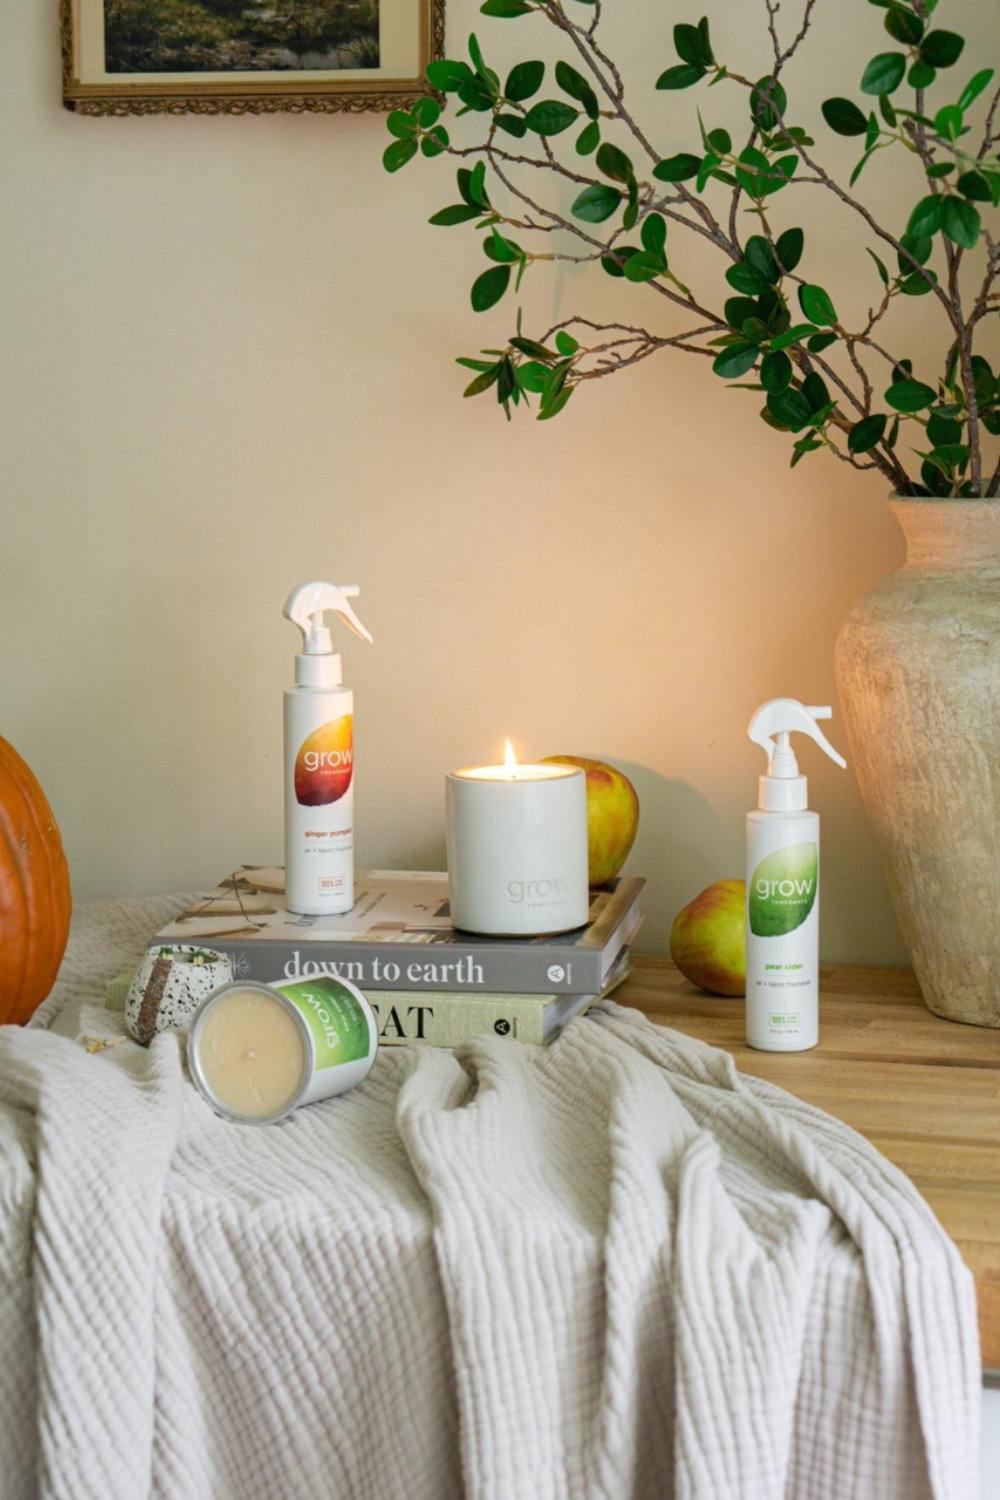 1. Non-toxic home fragrance options: Woodland Sage, Ginger Pumpkin, Pear Cider, Apple Pomander. 2. Fall scents for a cozy atmosphere: Woodland Sage, Ginger Pumpkin, Pear Cider, Apple Pomander. 3. Transform your space with eco-friendly scents: Woodland Sage, Ginger Pumpkin, Pear Cider, Apple Pomander. 4. Elevate your home ambiance with non-toxic fragrances: Woodland Sage, Ginger Pumpkin, Pear Cider, Apple Pomander. 5. Embrace the season with delightful scents: Woodland Sage, Ginger Pumpkin, Pear Cider, Apple Pomander. 6. Creating a fall-inspired environment: Woodland Sage, Ginger Pumpkin, Pear Cider, Apple Pomander.